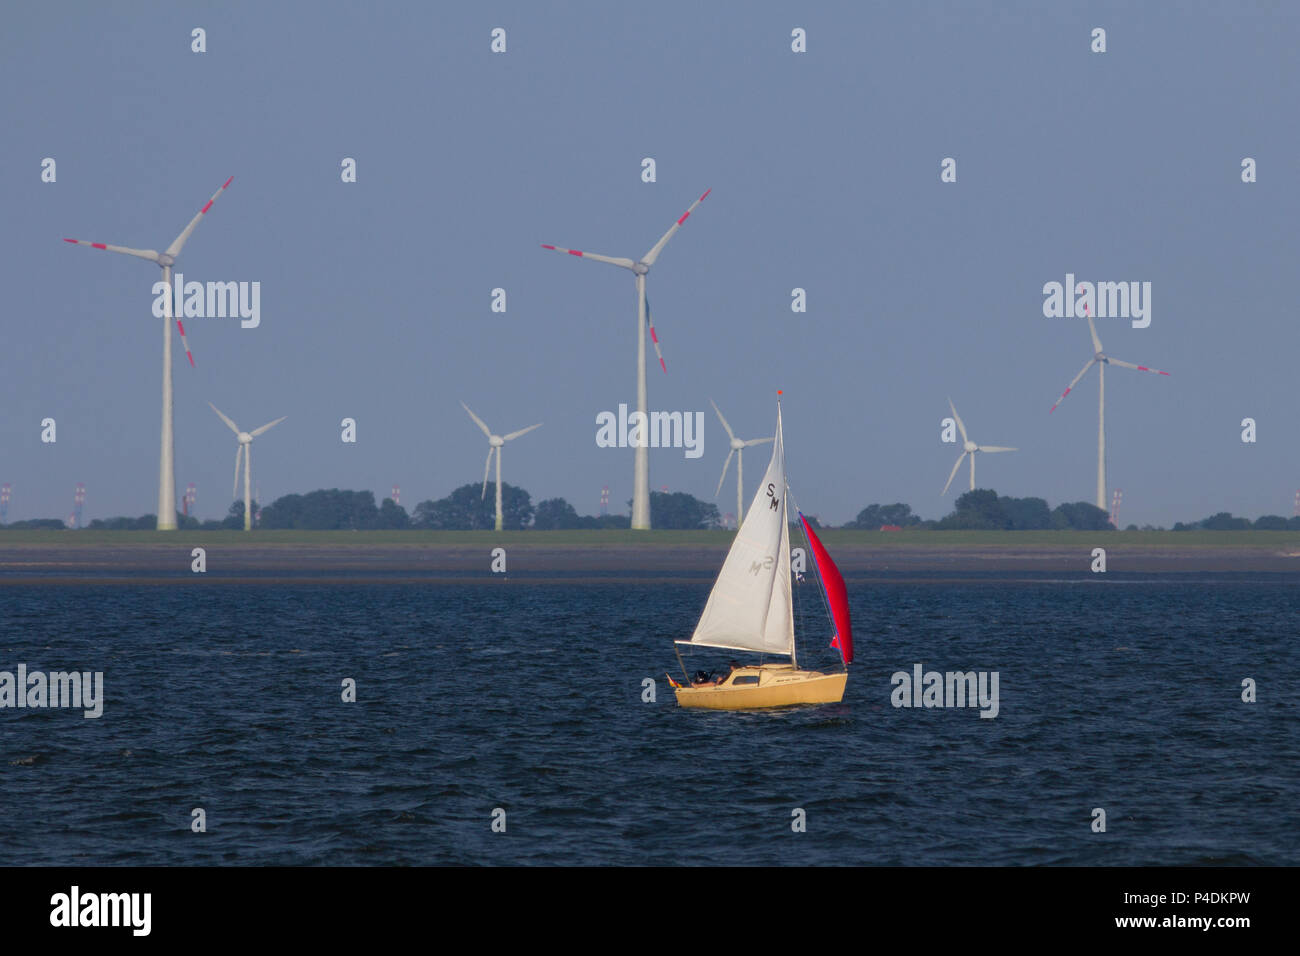 A small yellow day sailing yacht in the Baltic Sea in front of a wind farm, at sunrise. Stock Photo